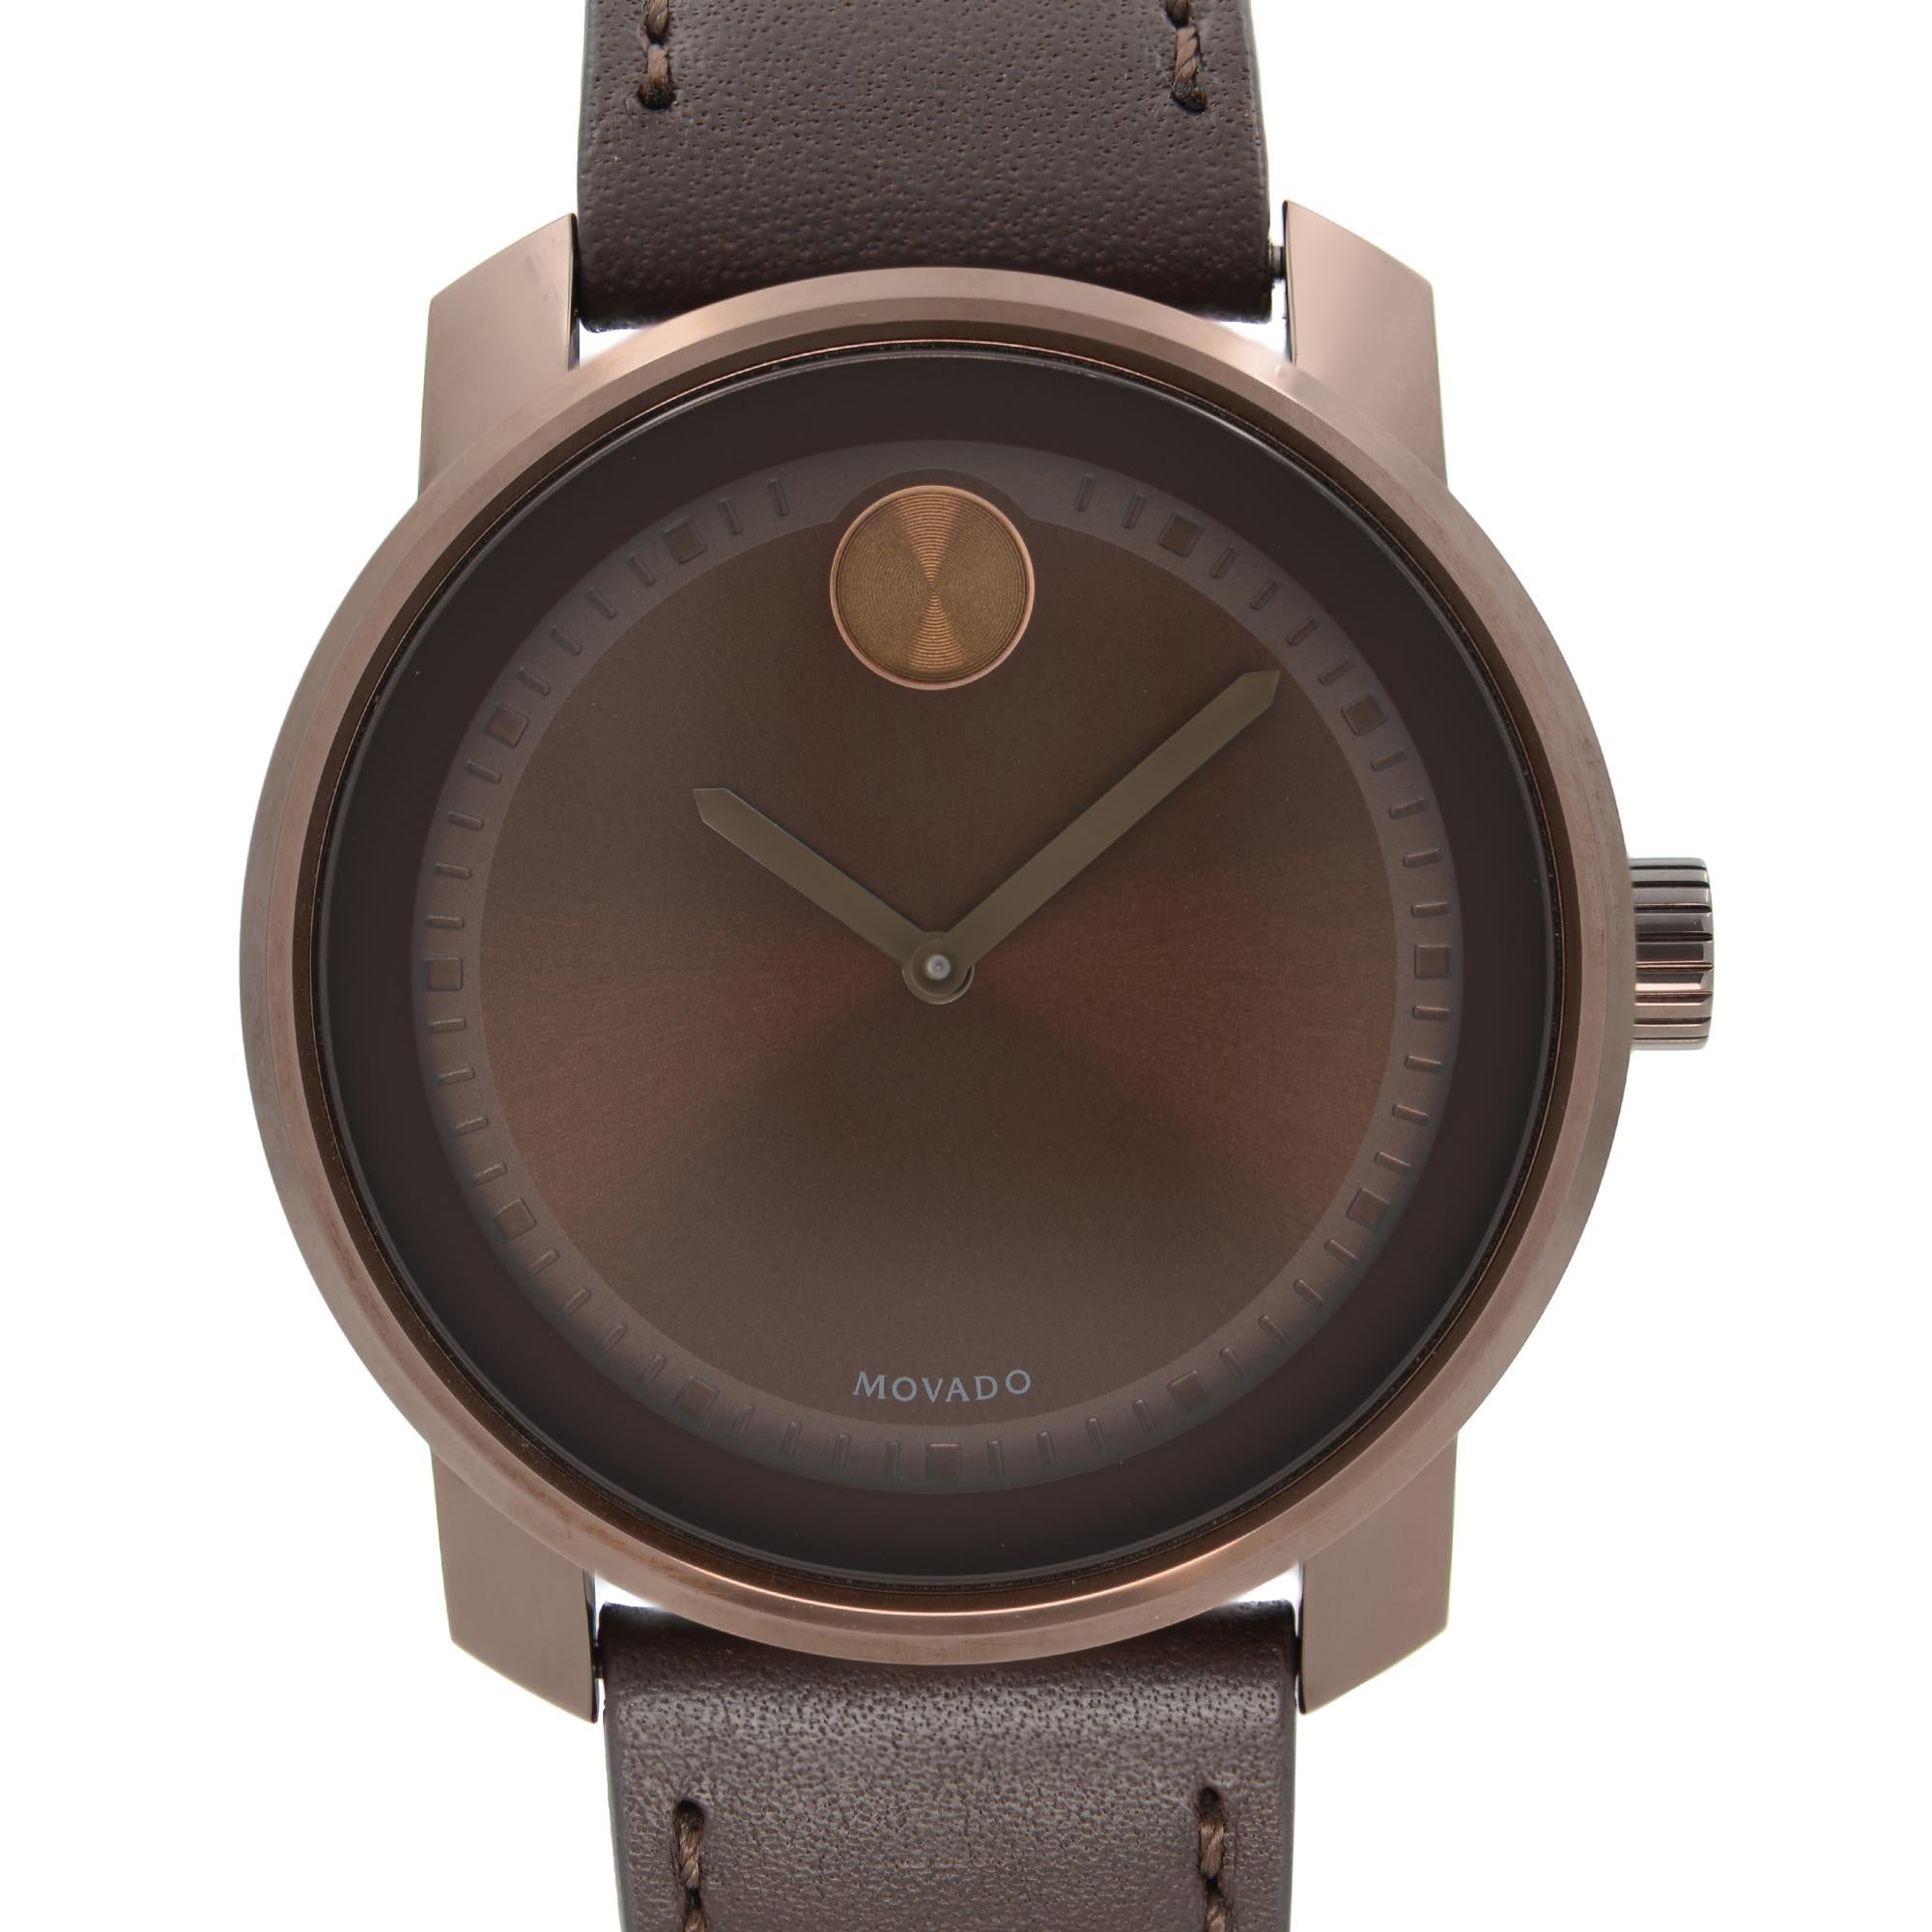 Never Worn Movado Bold Unisex Watch 3600377. This Beautiful Timepiece Features: Brown Ion-Plated Stainless Steel Case with a Brown Leather Strap. Original Box and Papers are Included. Covered by 1-year Chronostore Warranty. 
Details:
MSRP 595
Brand